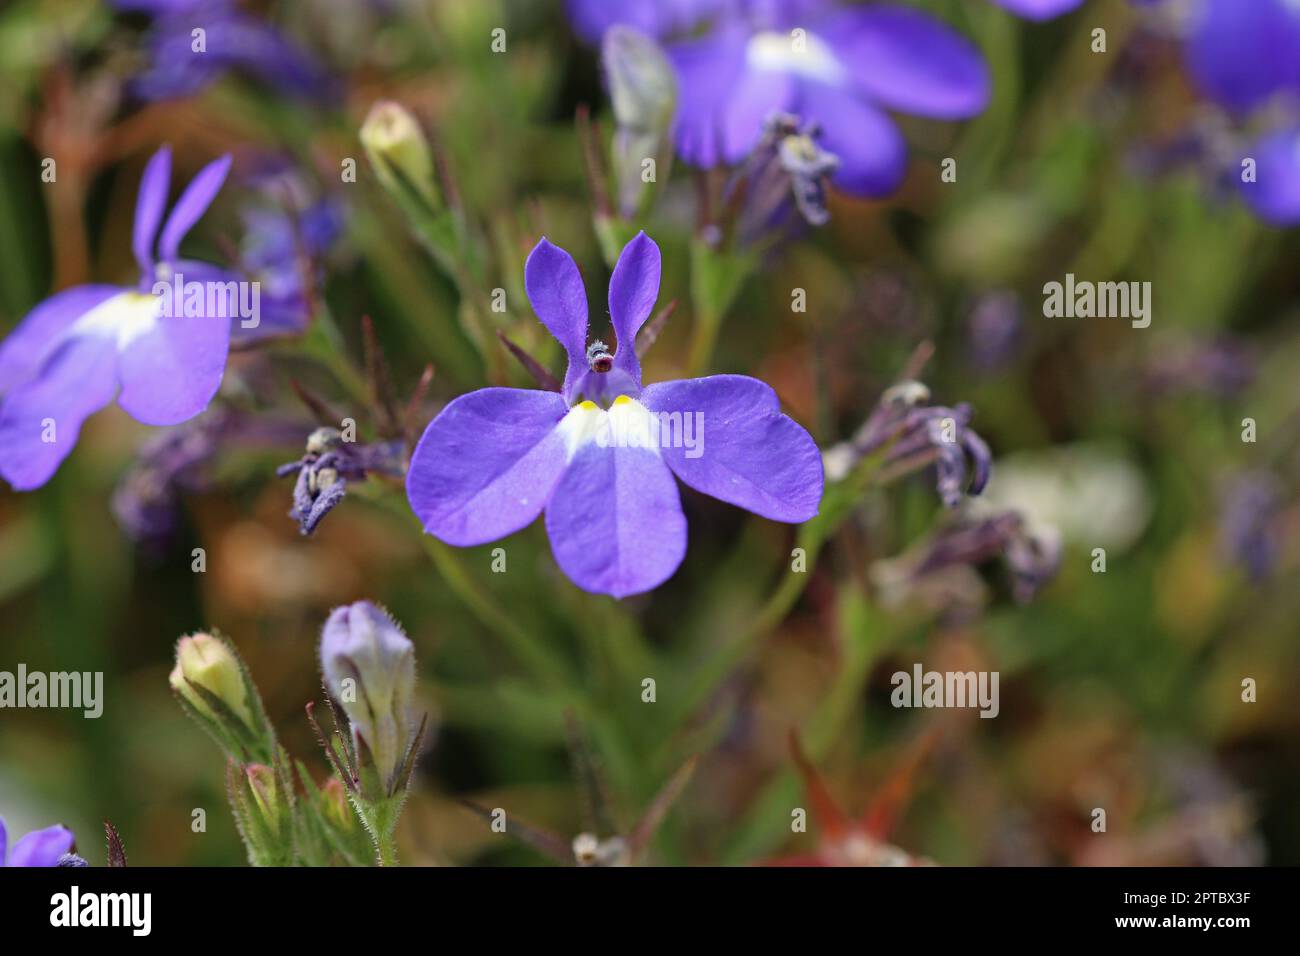 Blue lobelia, Lobelia erinus of unknown variety, flowers in close up with a blurred background of leaves and faded flowers. Stock Photo